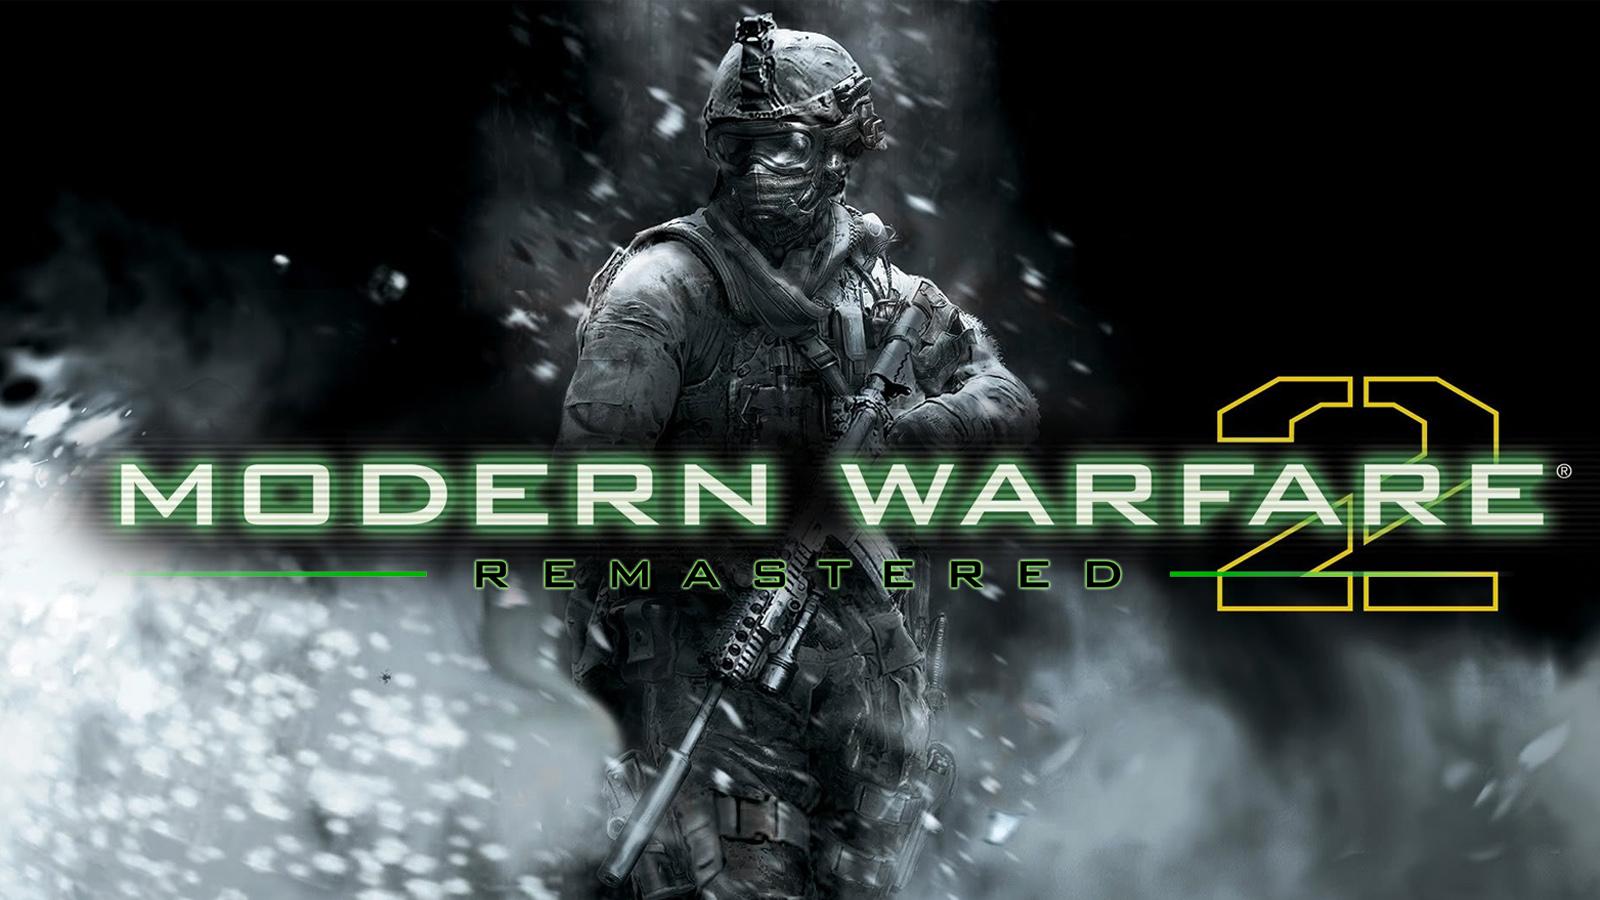 When is Call of Duty: MW2 Remastered coming out? Rumors, release date and  more - Dexerto